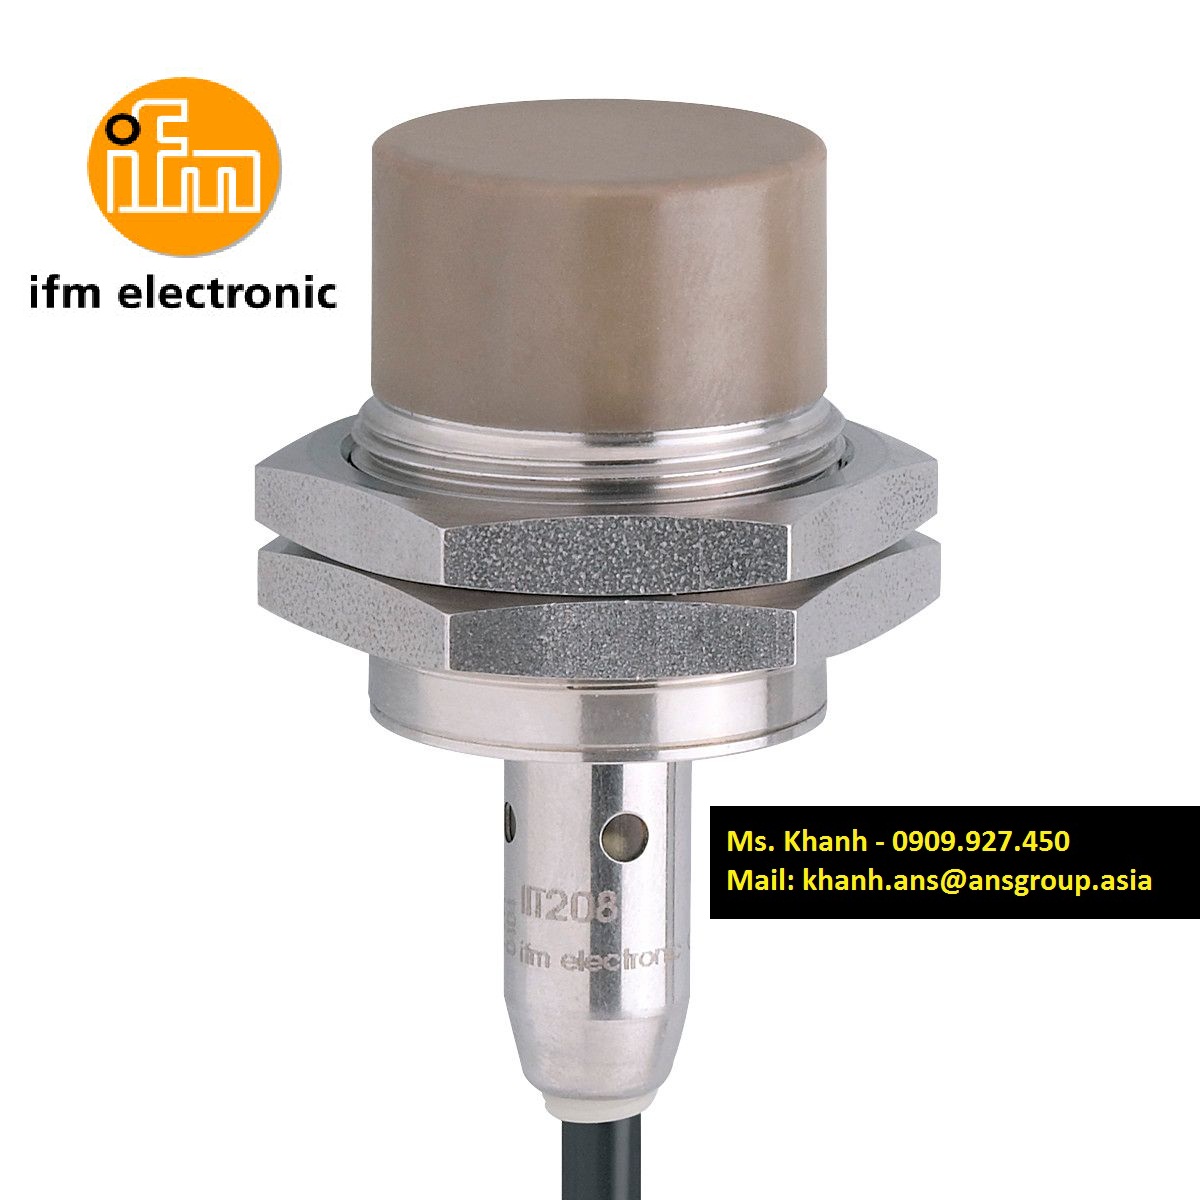 proximity-switch-iit207-ifm.png